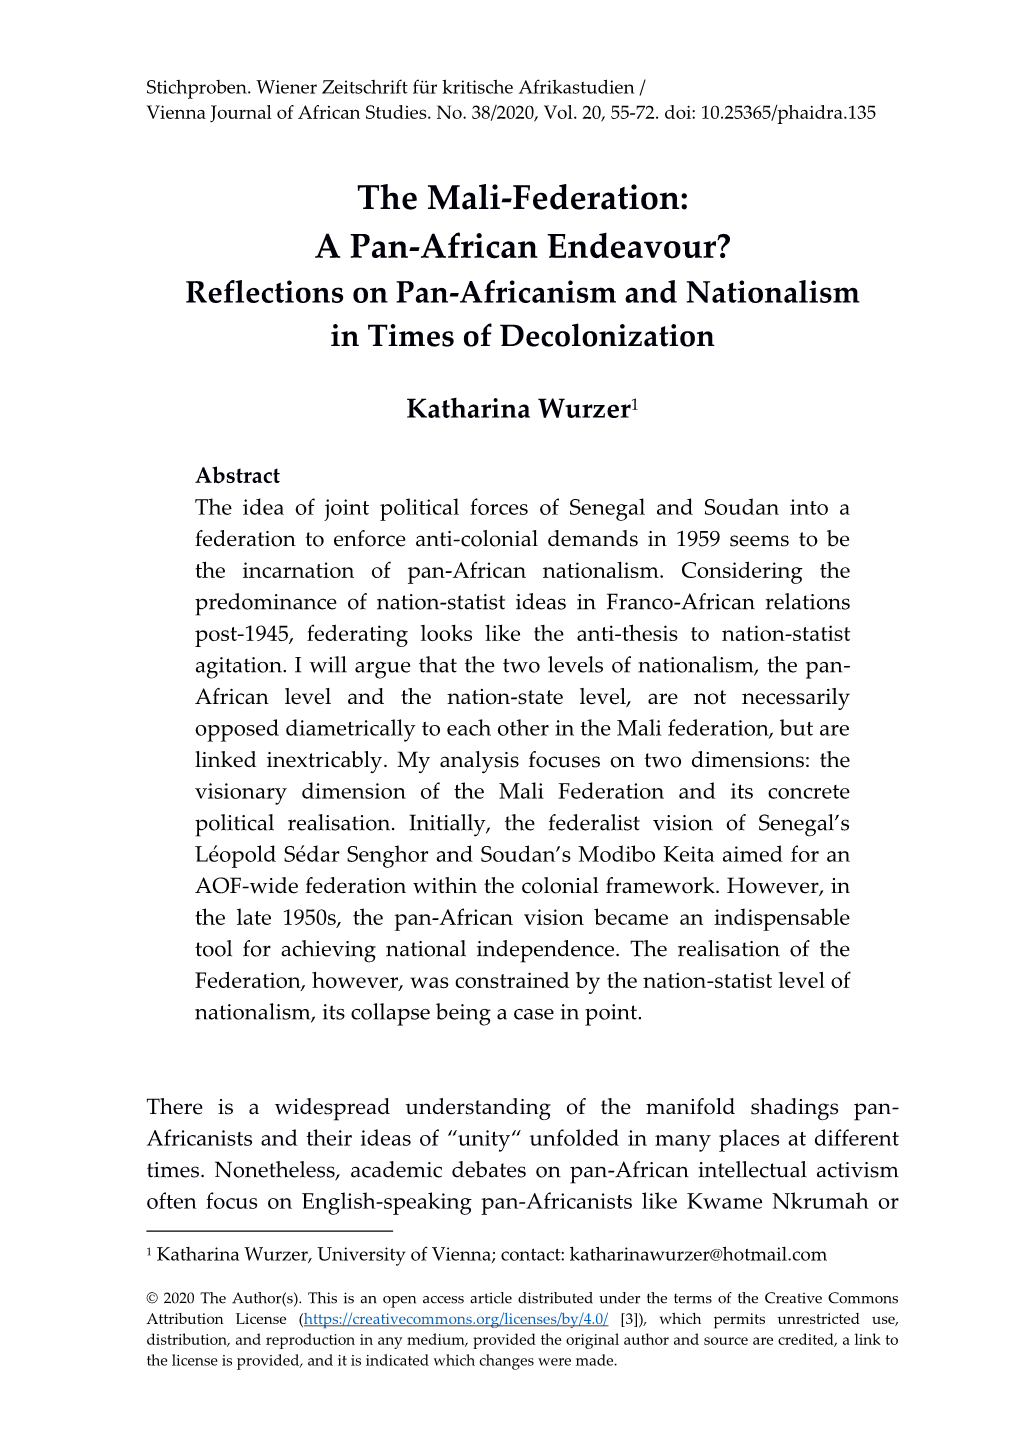 The Mali-Federation: a Pan-African Endeavour? Reflections on Pan-Africanism and Nationalism in Times of Decolonization